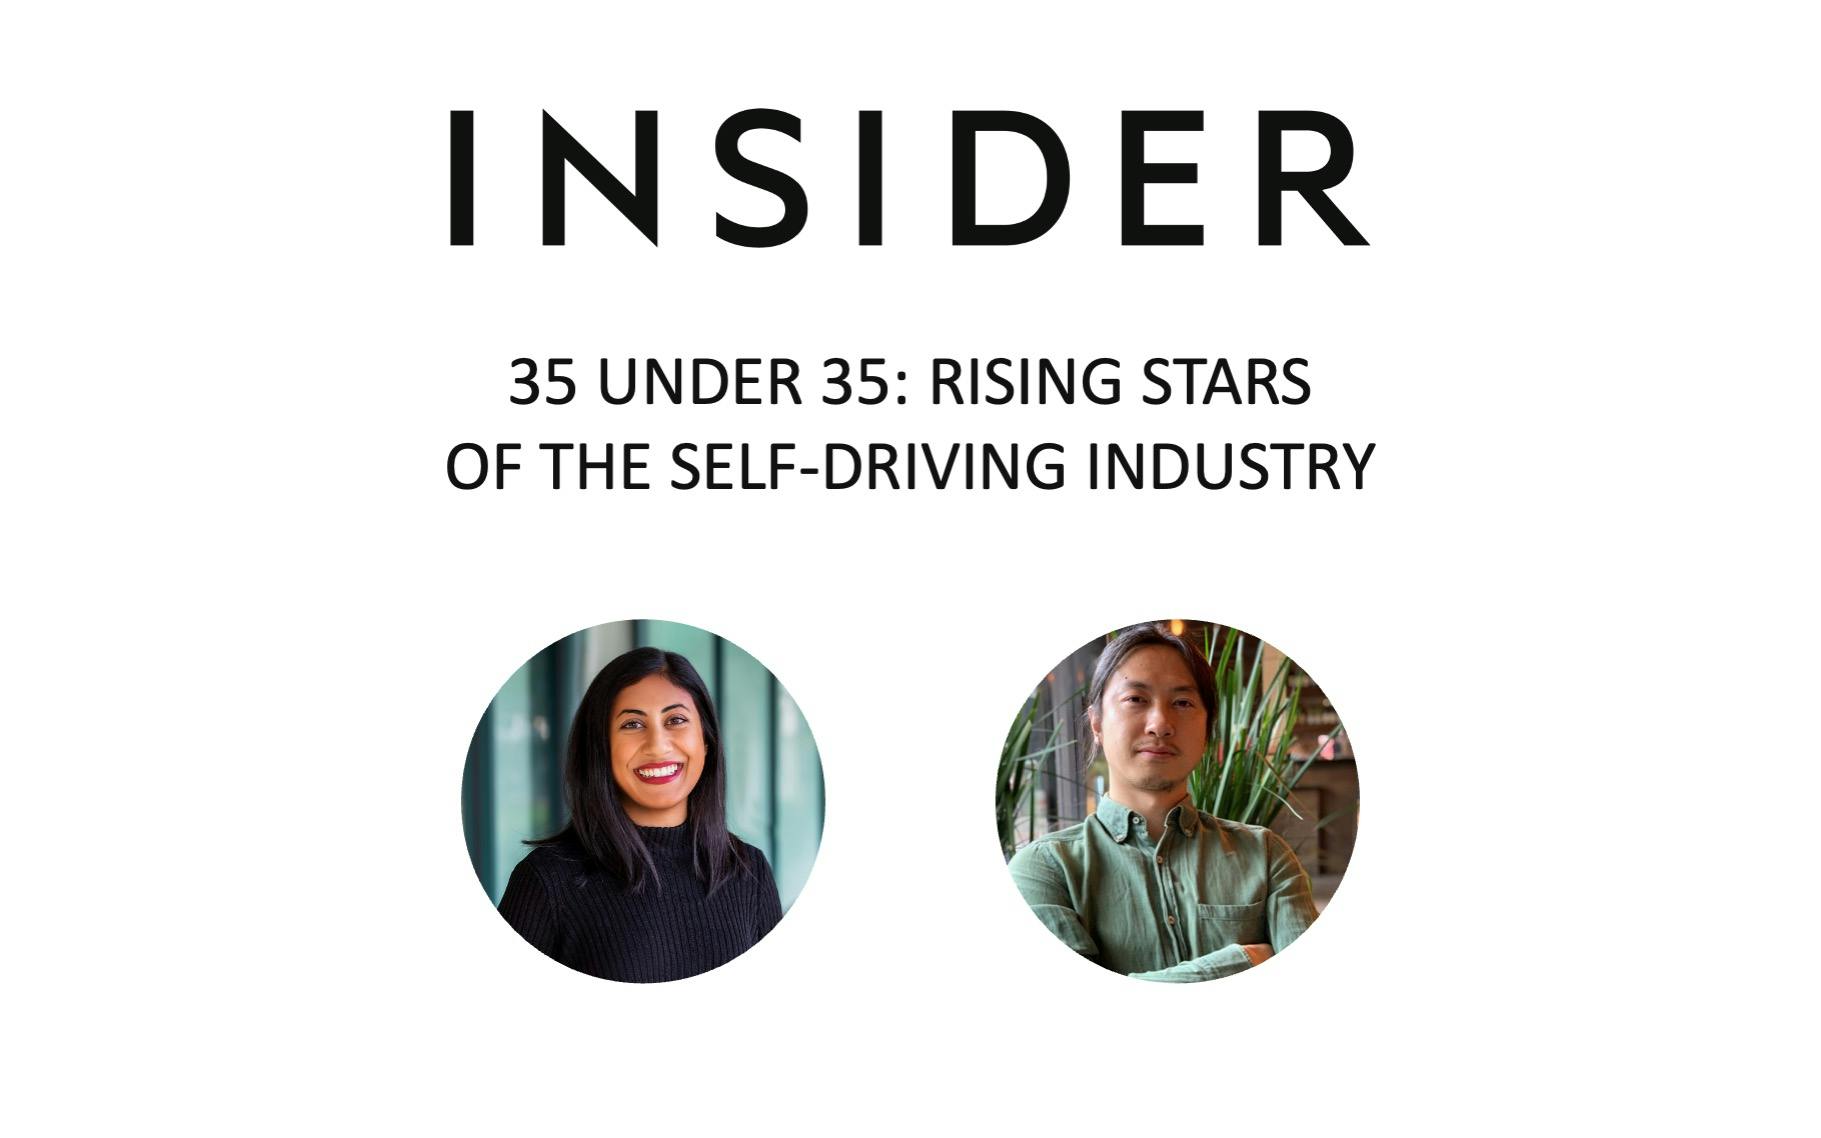 Insider: 35 Under 35:  Rising Stars of the Self-Driving Industry